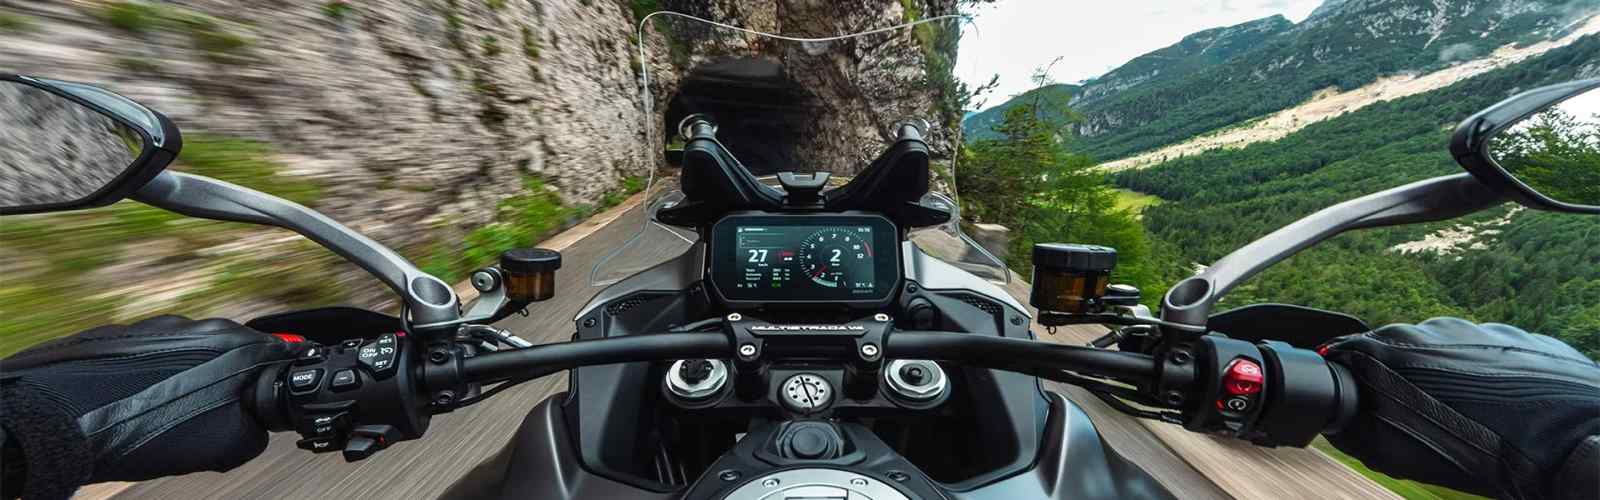 Motorcycling Vercors: from Clavier to Col de Rousset